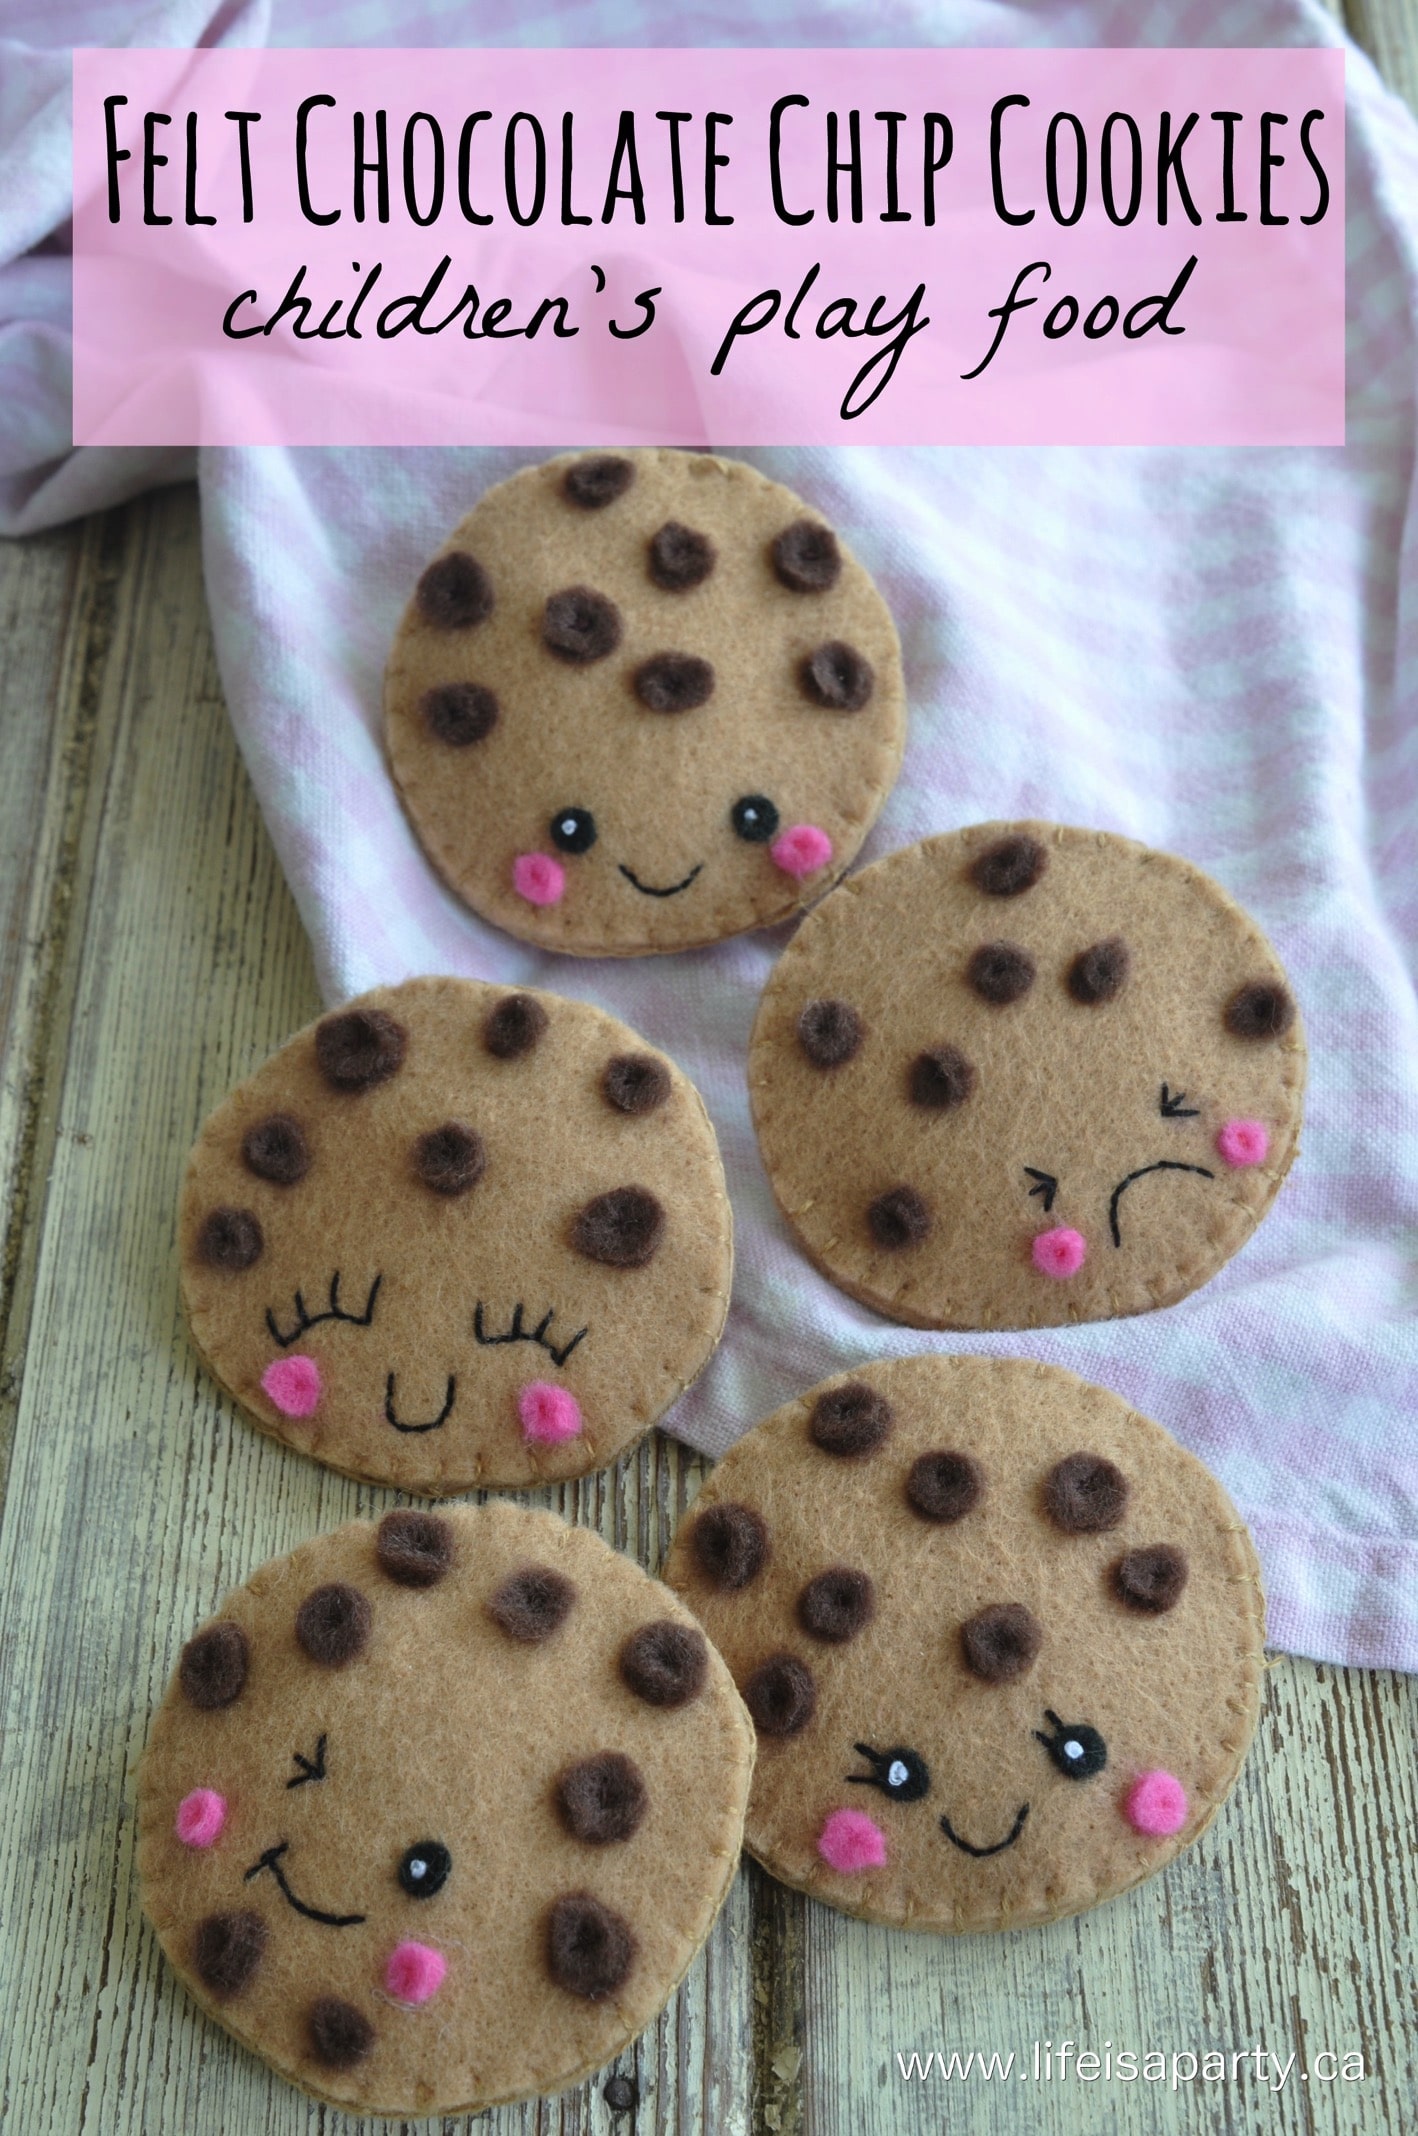 Felt Chocolate Chip Cookies -easy to sew, and the perfect play food for kids to enjoy. The little faces with their different expressions are adorable.